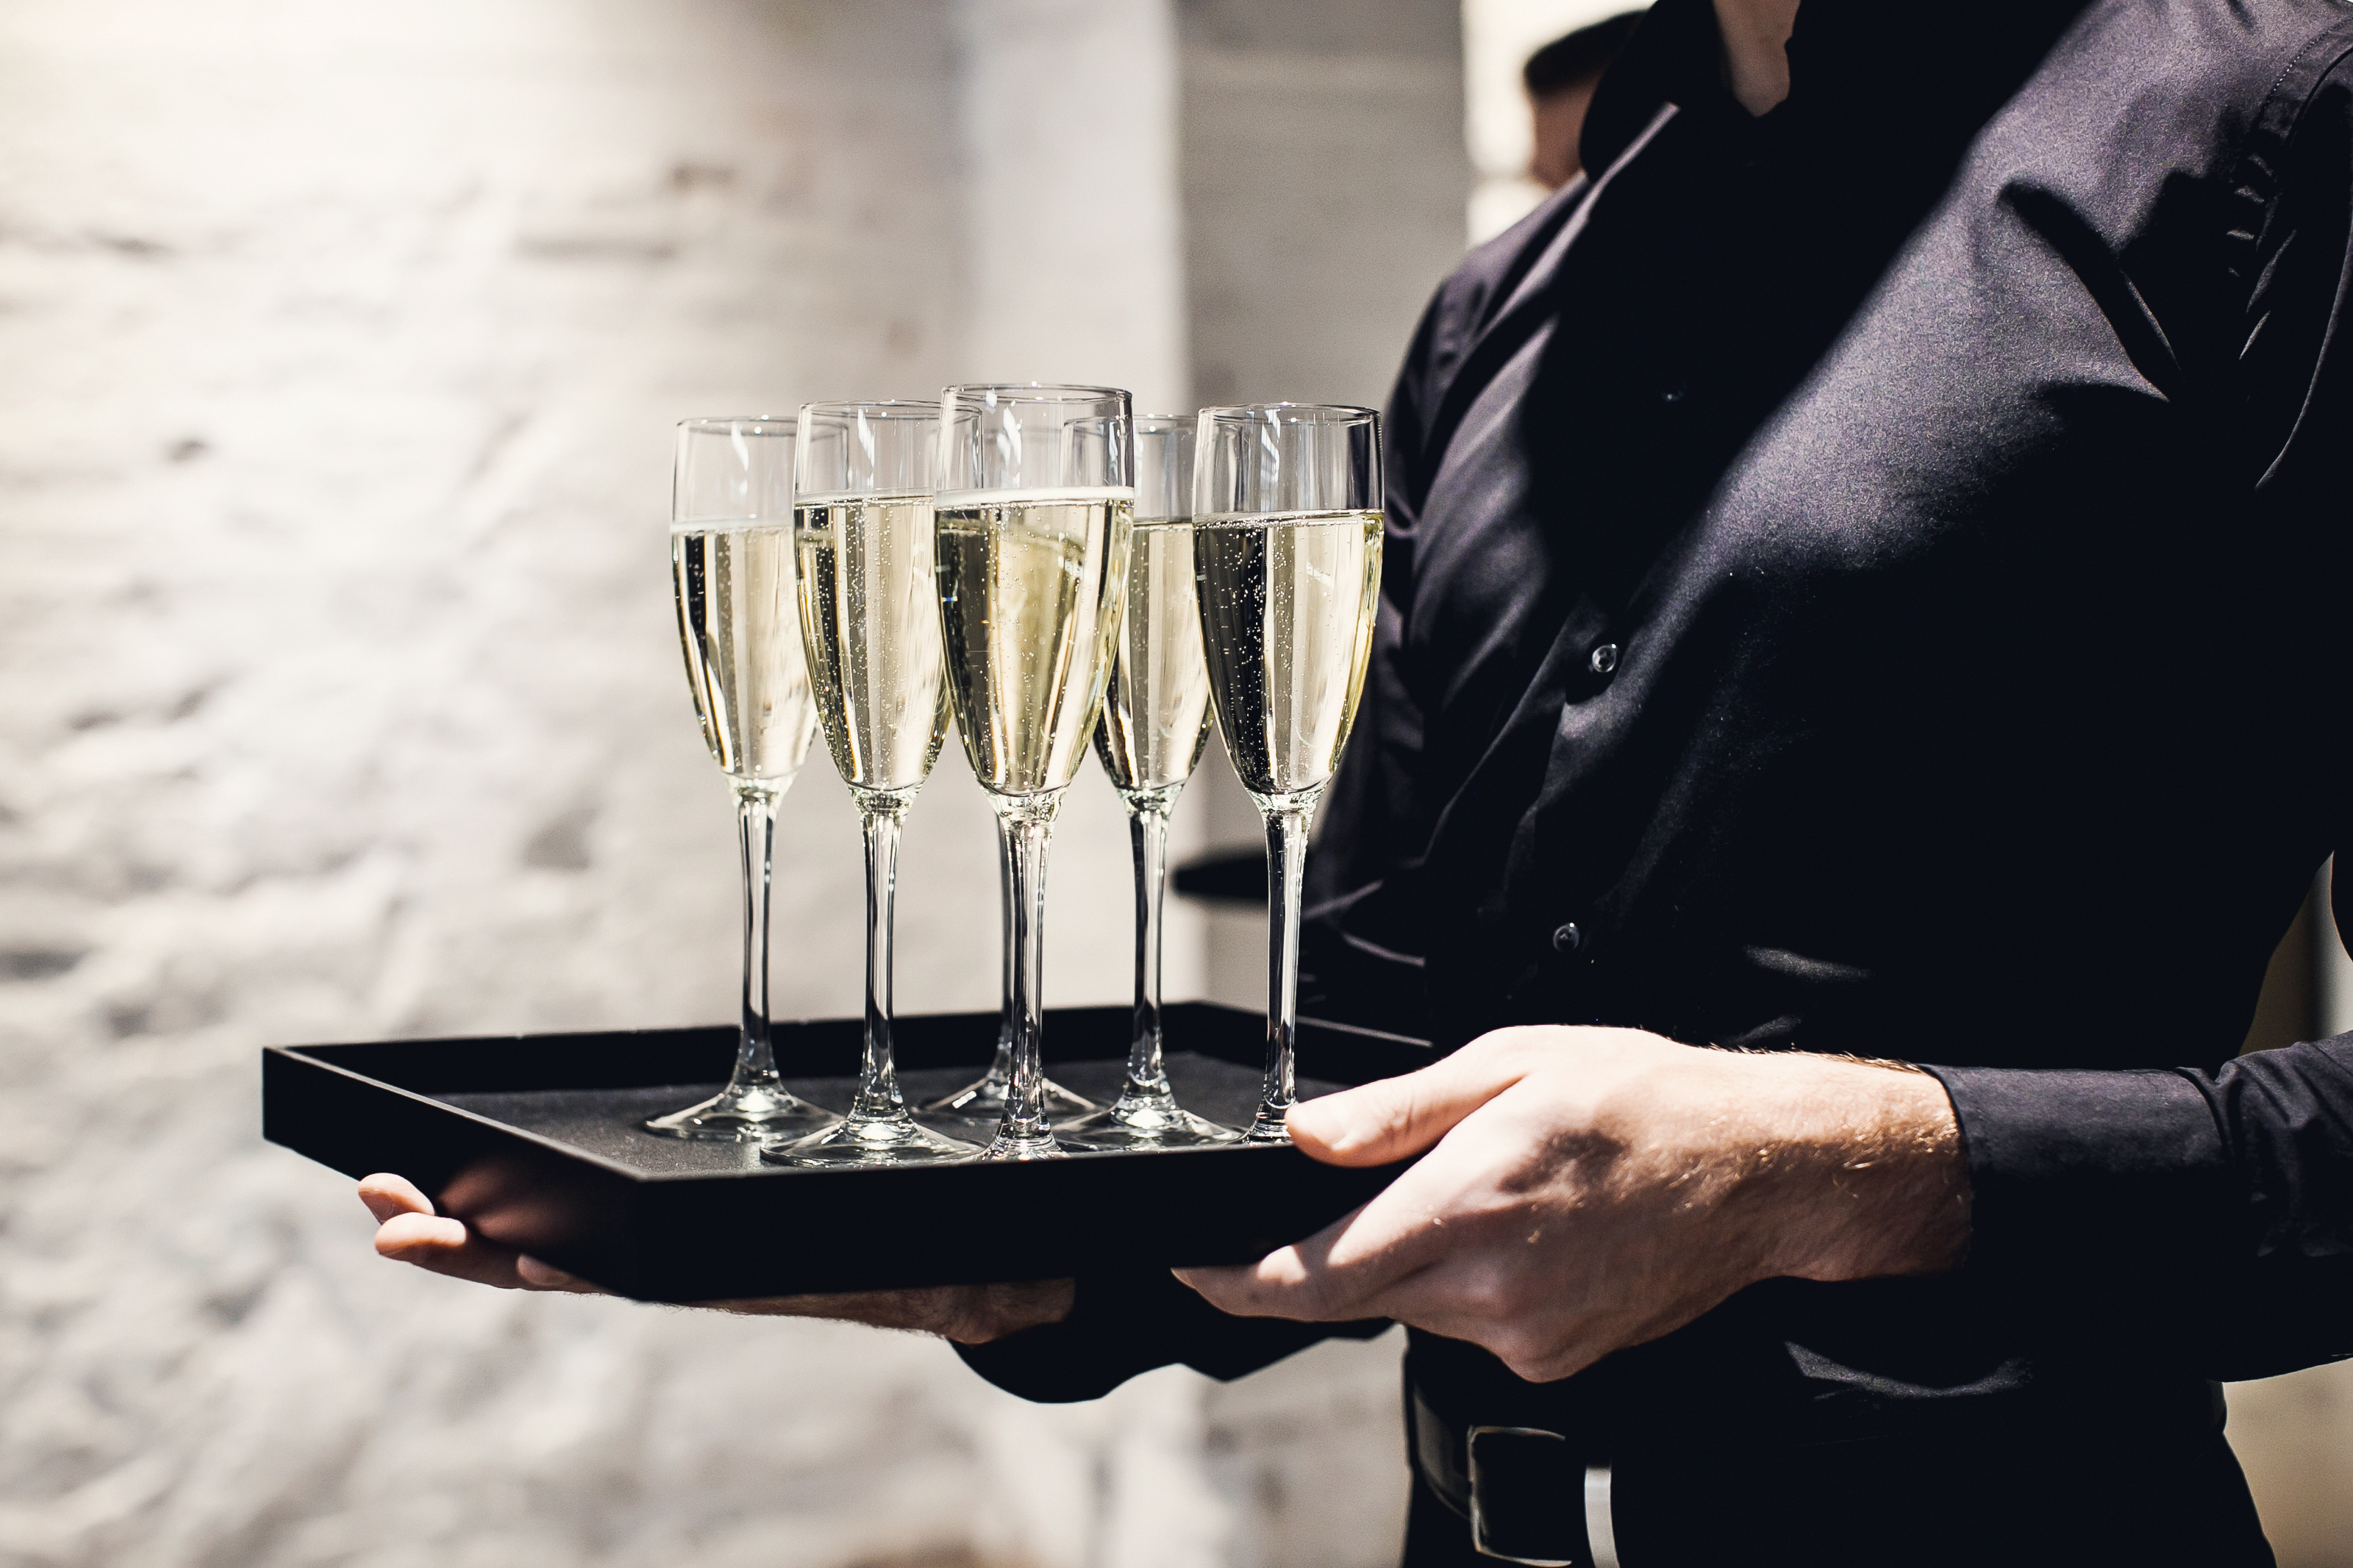 A waiter holding glasses with champagne served on a tray. | Source: Shutterstock